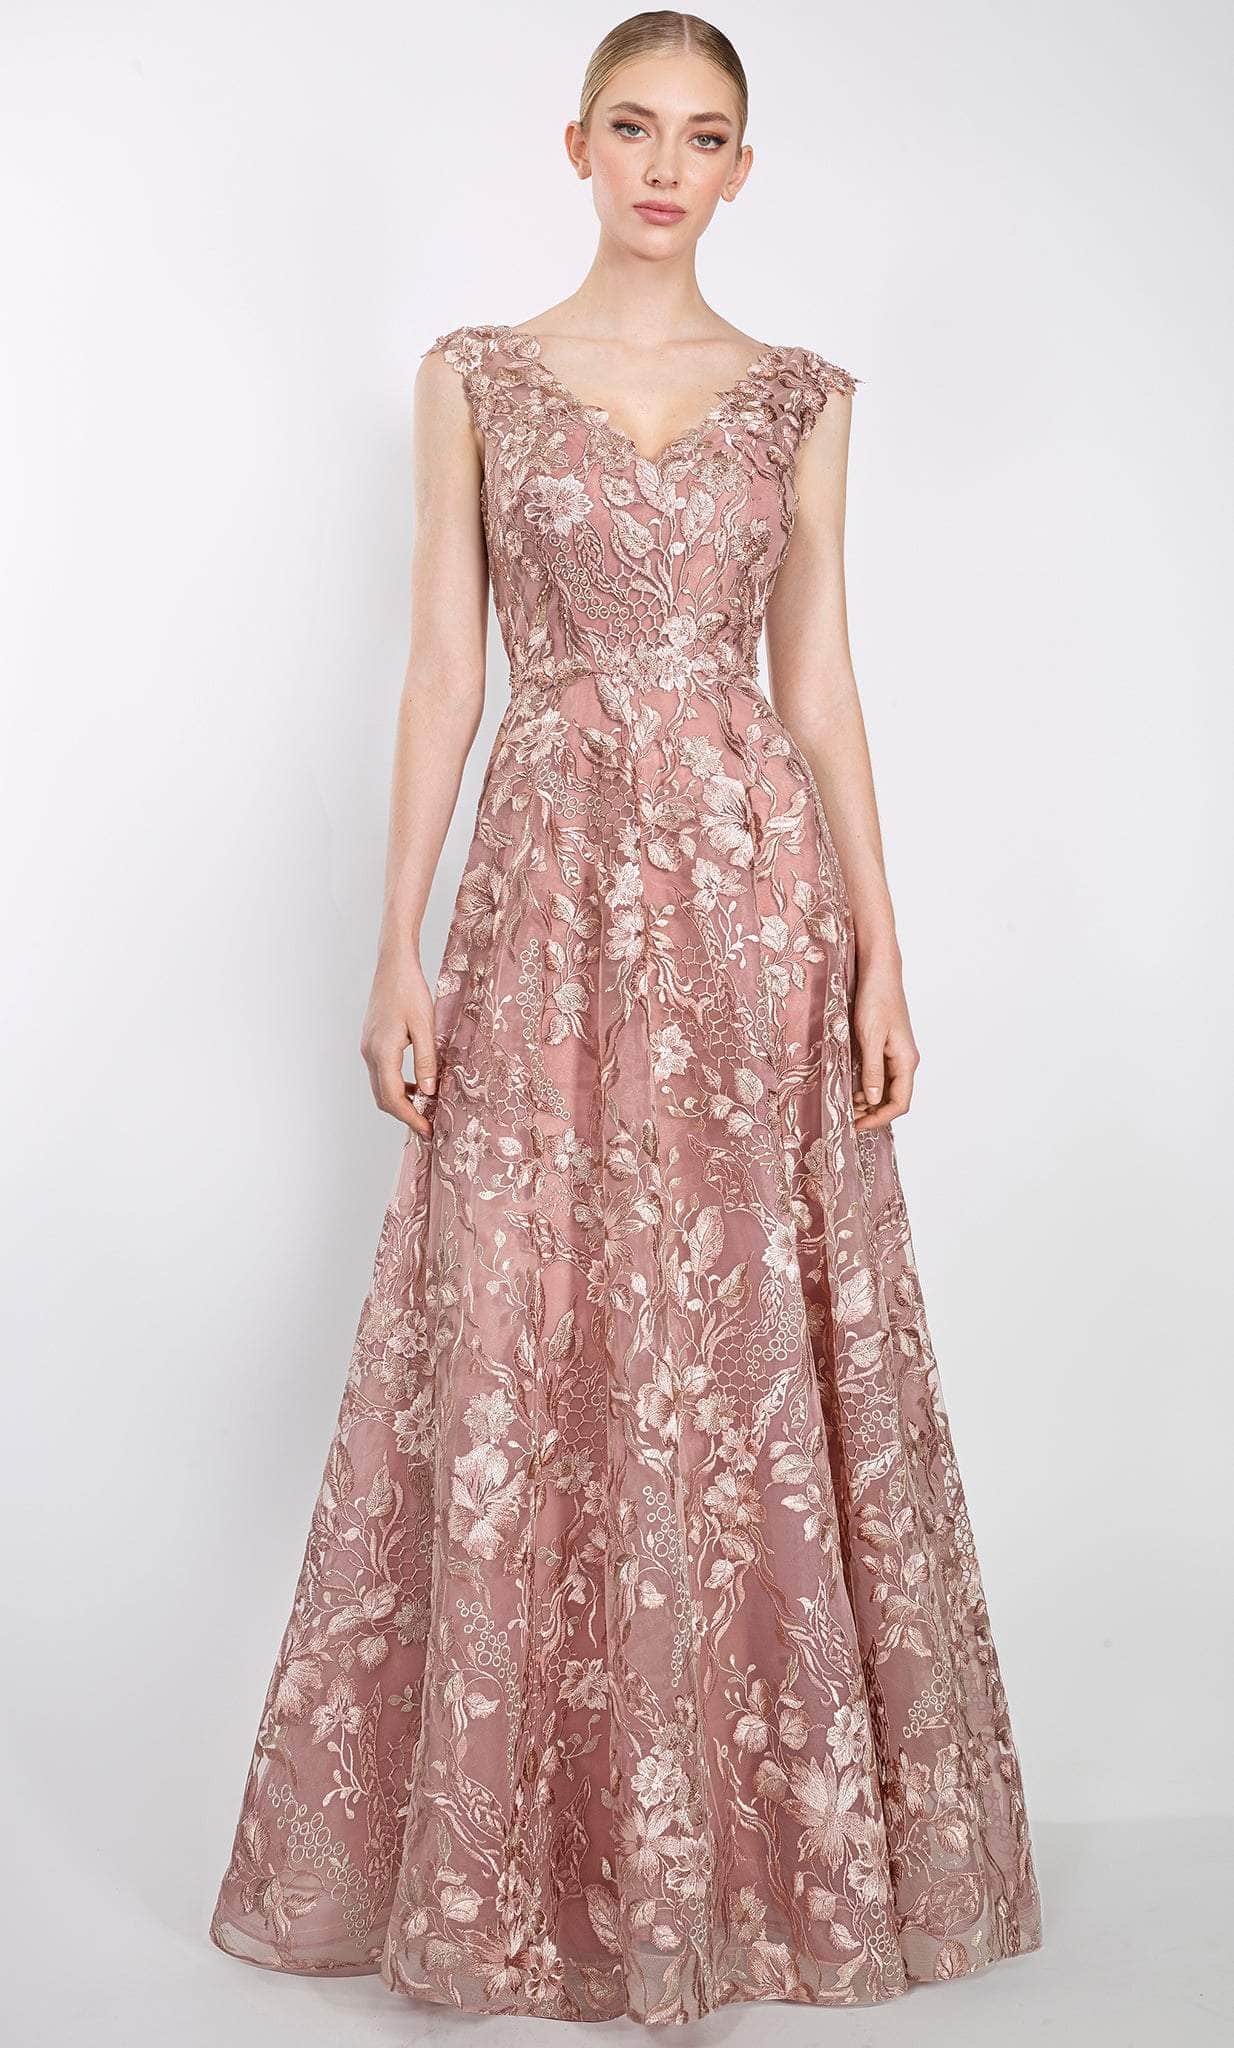 Image of Janique W3001 - Embroidered A-Line Evening Dress